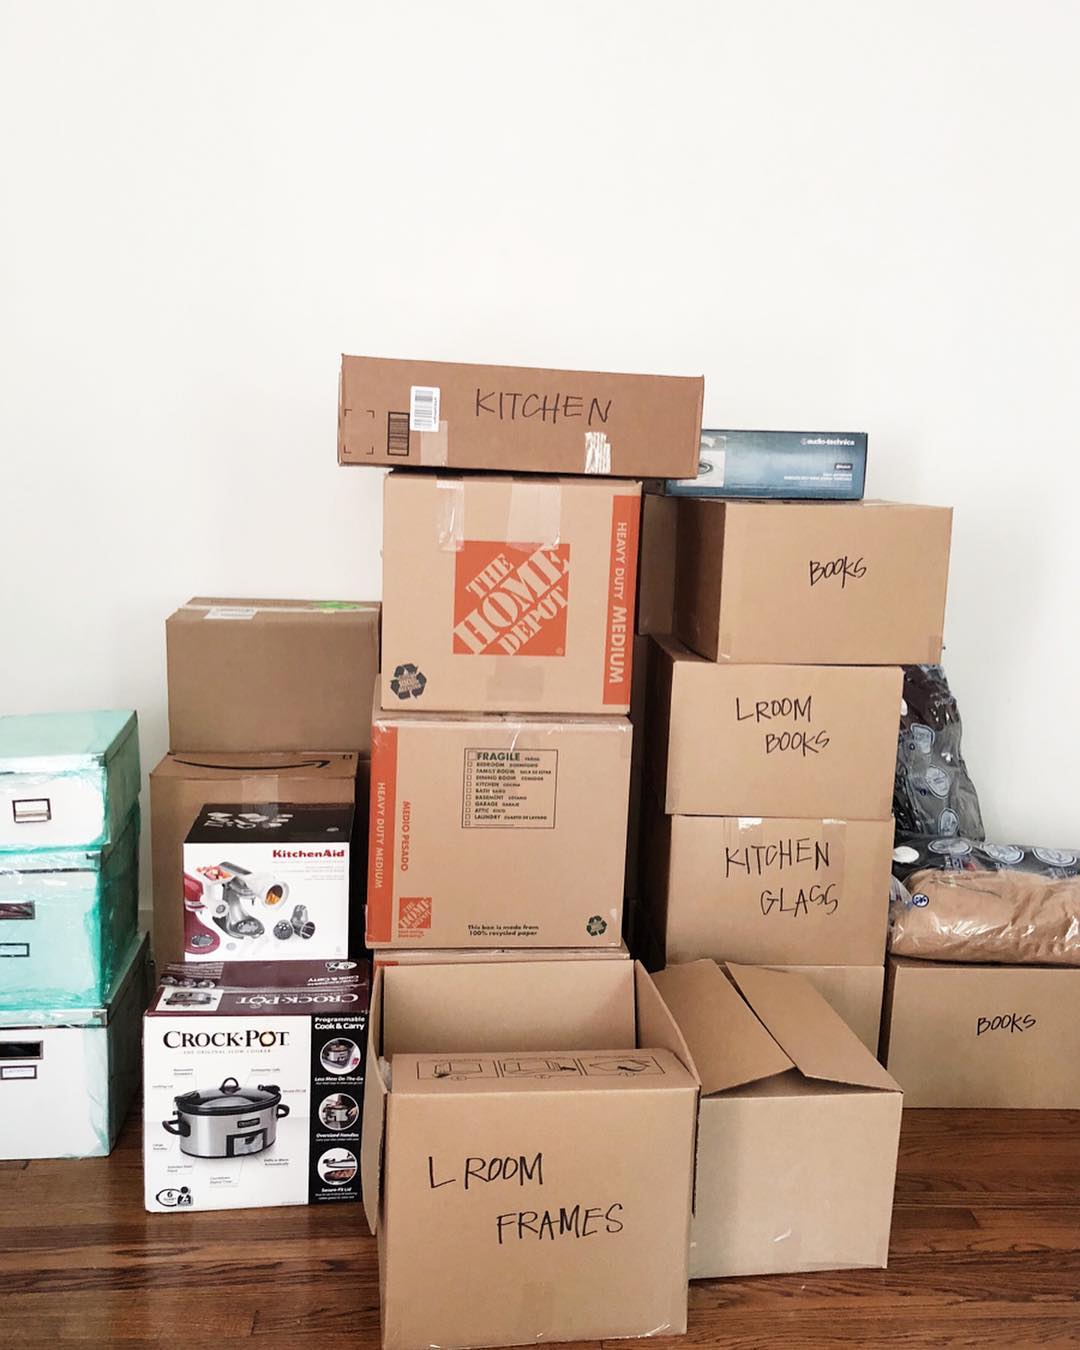 Moving Boxes Labeled for Specific Rooms. Photo by Instagram user @stephvilladavis